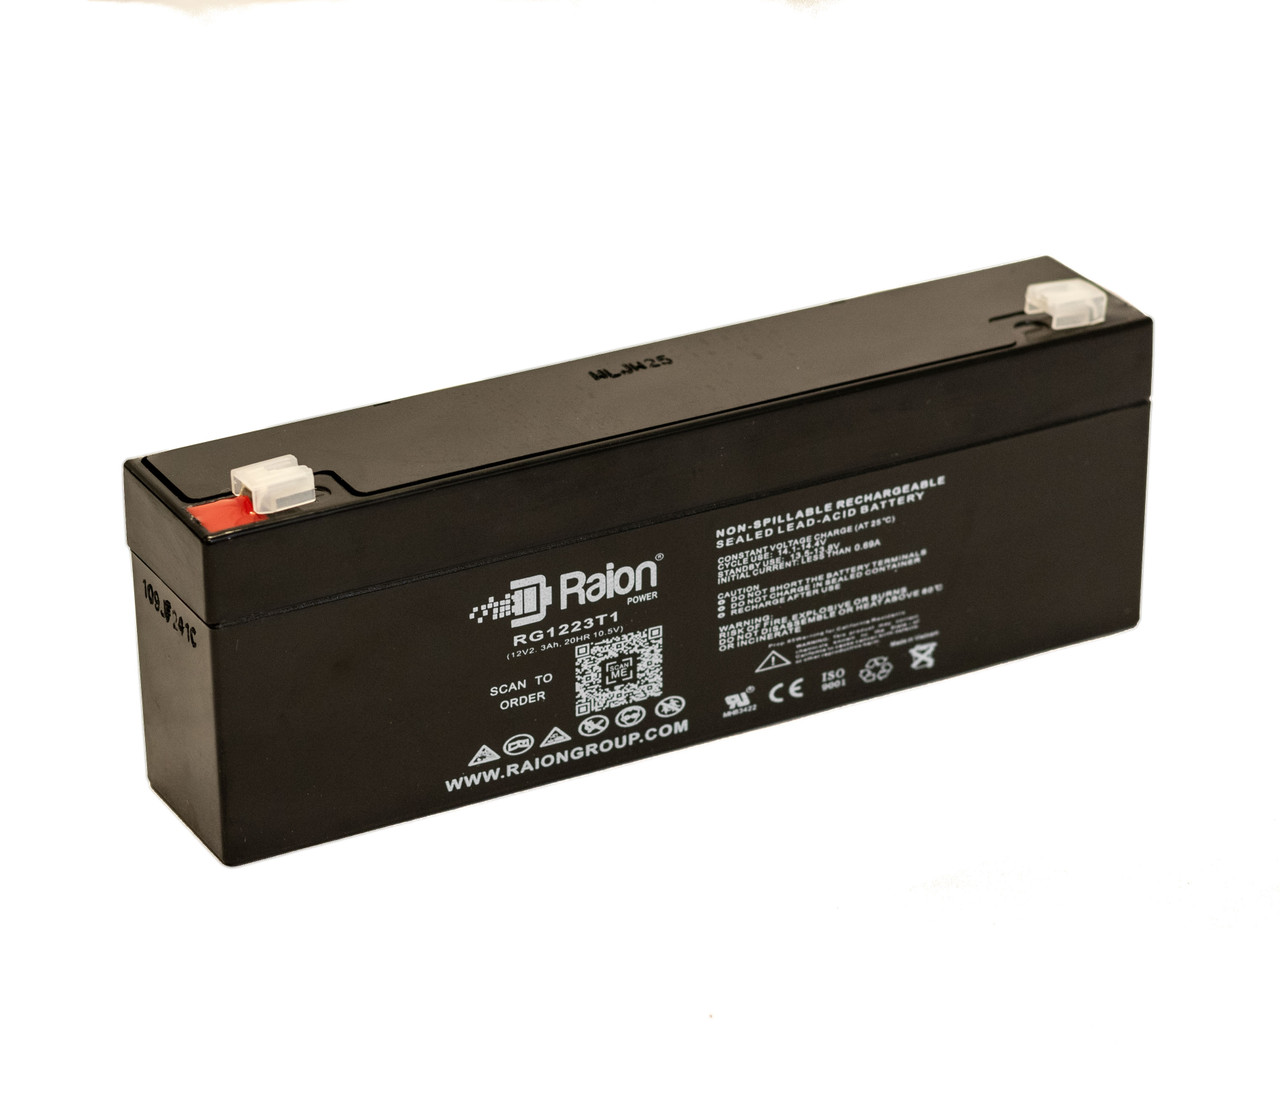 Raion Power RG1223T1 Replacement Battery for Hoyer RPA600 Patient Lift